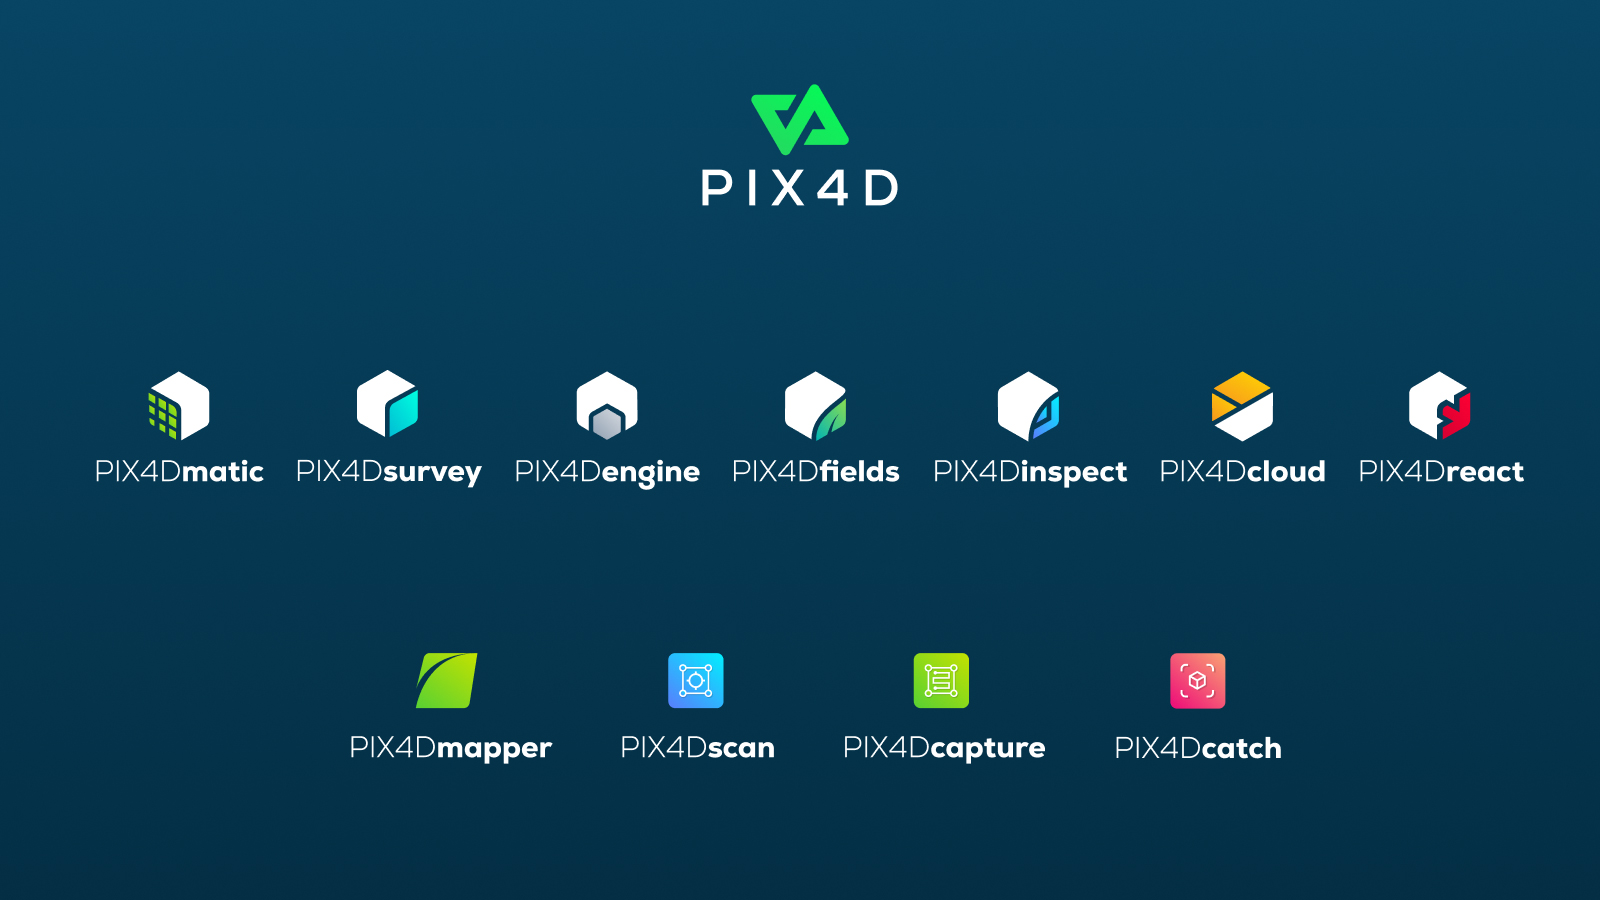 Pix4D product portfolio with logos and names